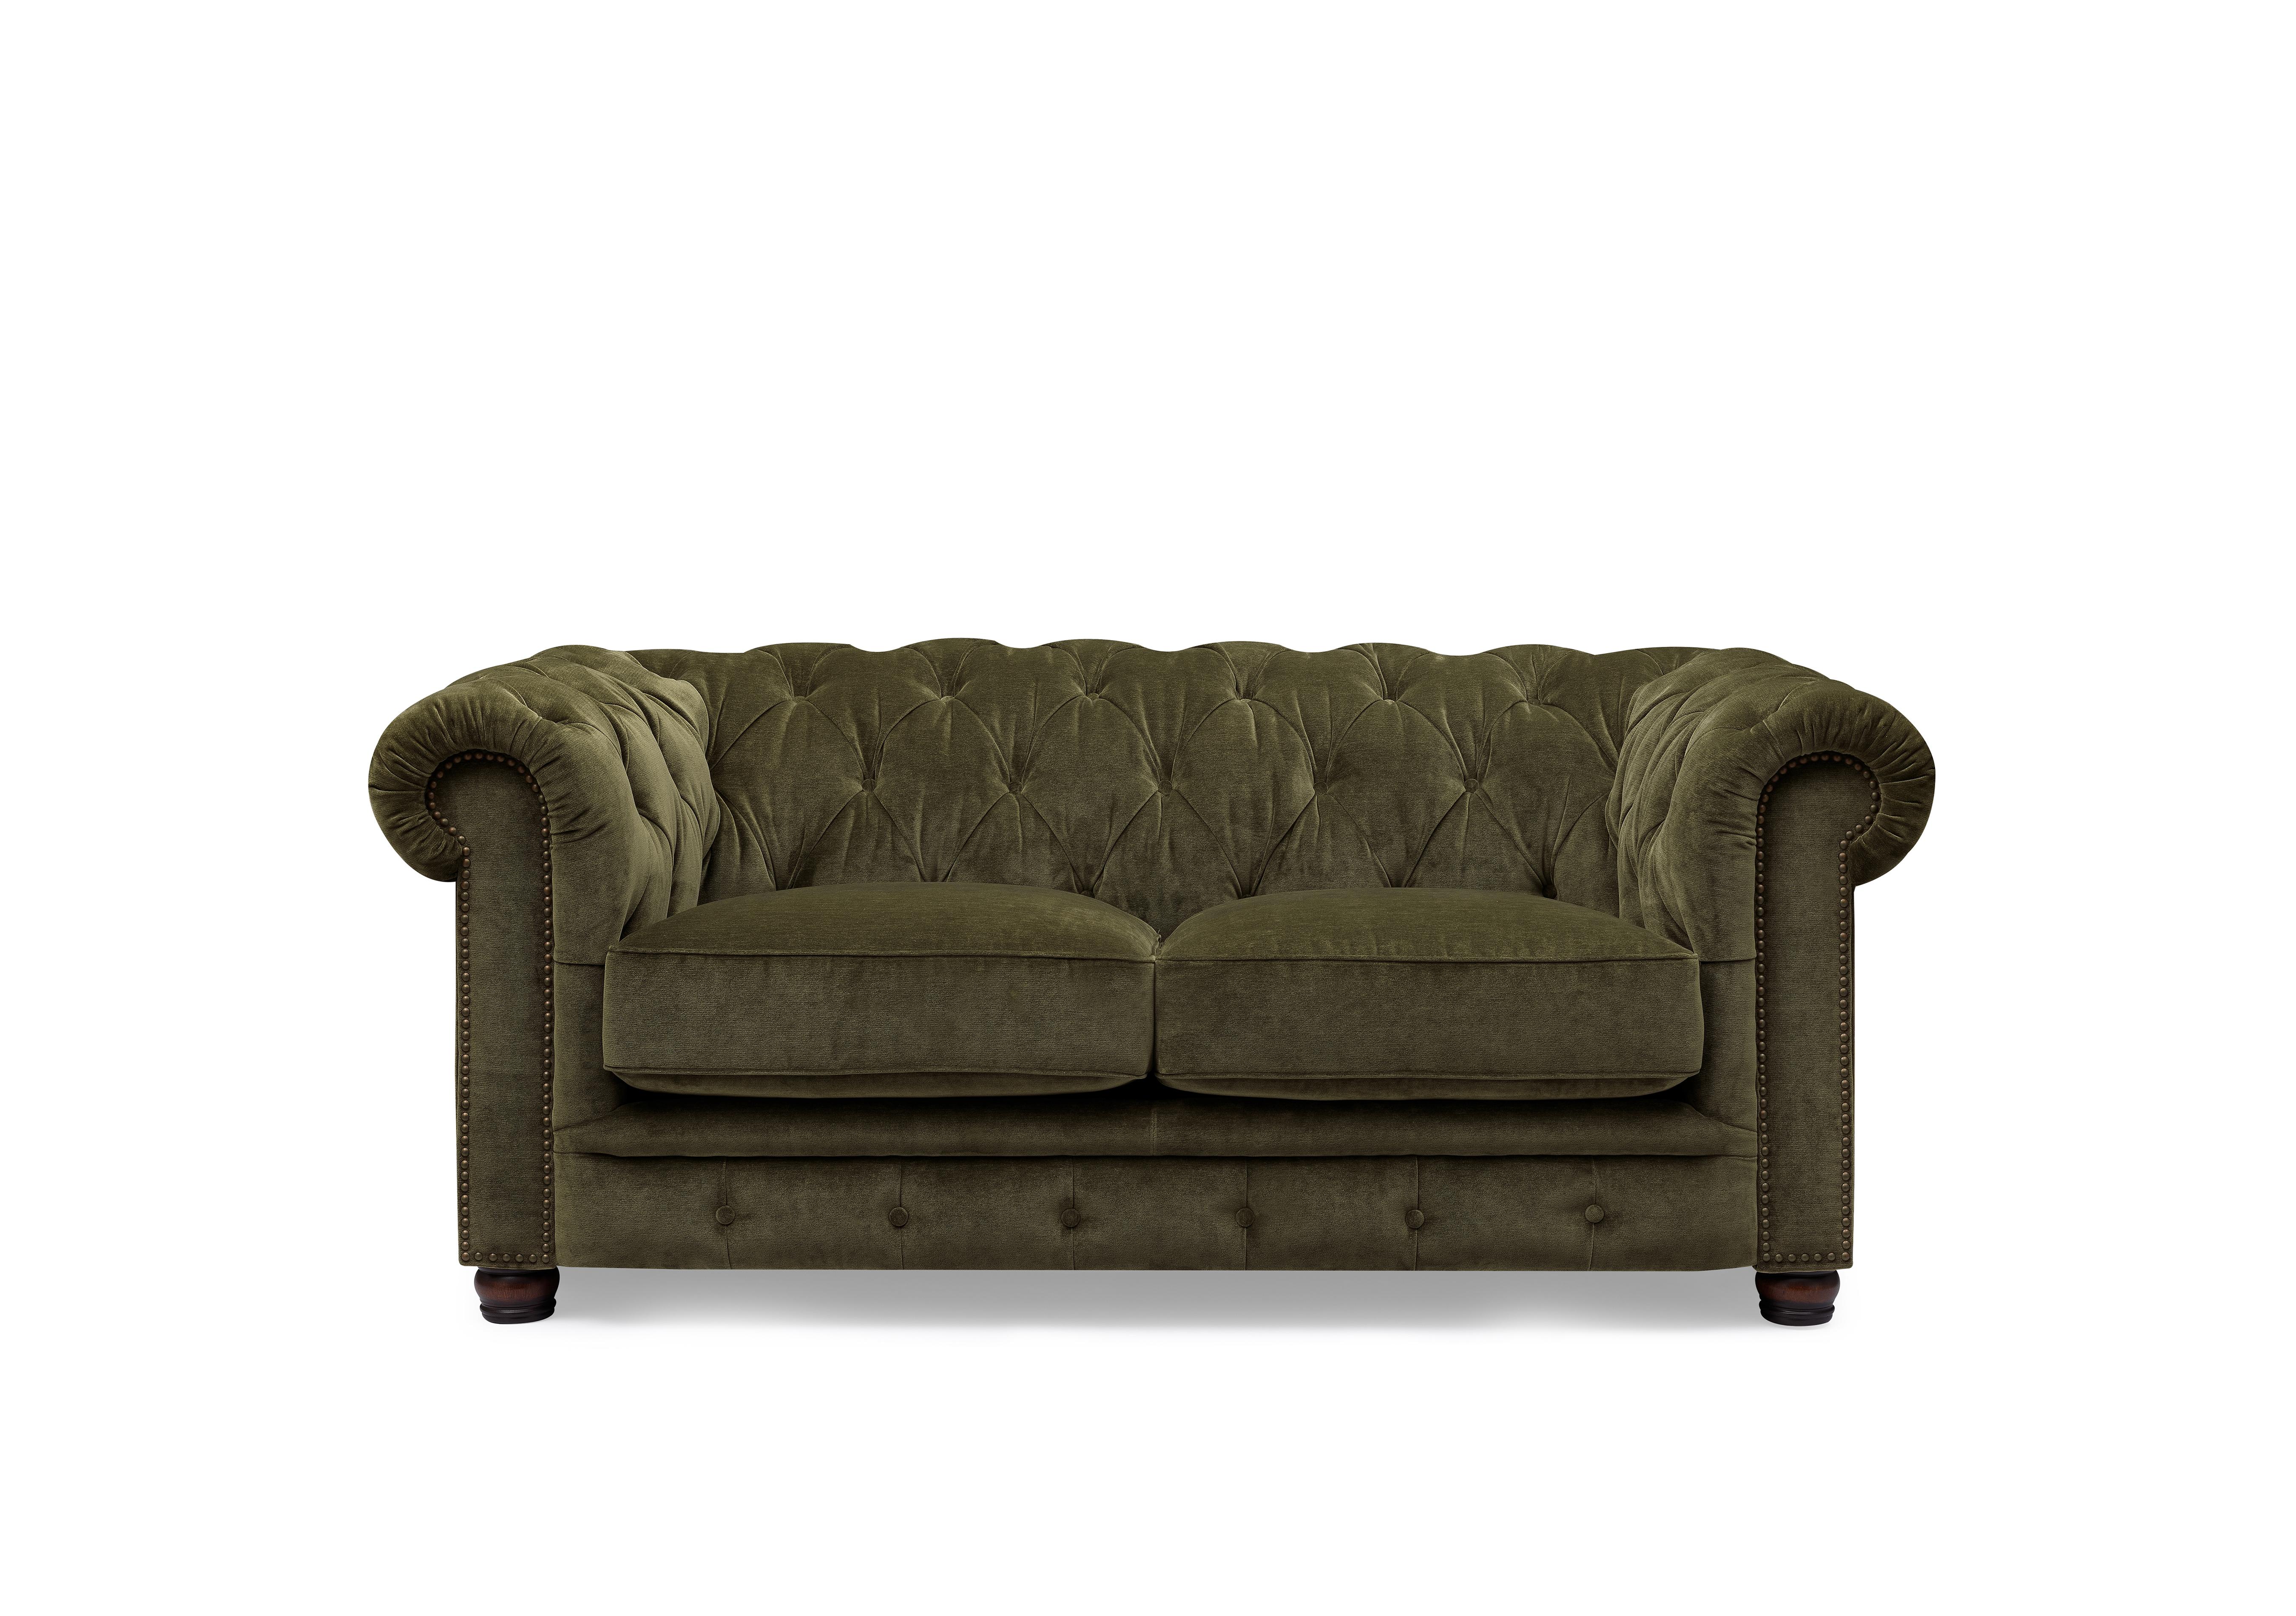 Shackleton 2 Seater Fabric Chesterfield Sofa with USB-C in X3y1-W018 Pine on Furniture Village